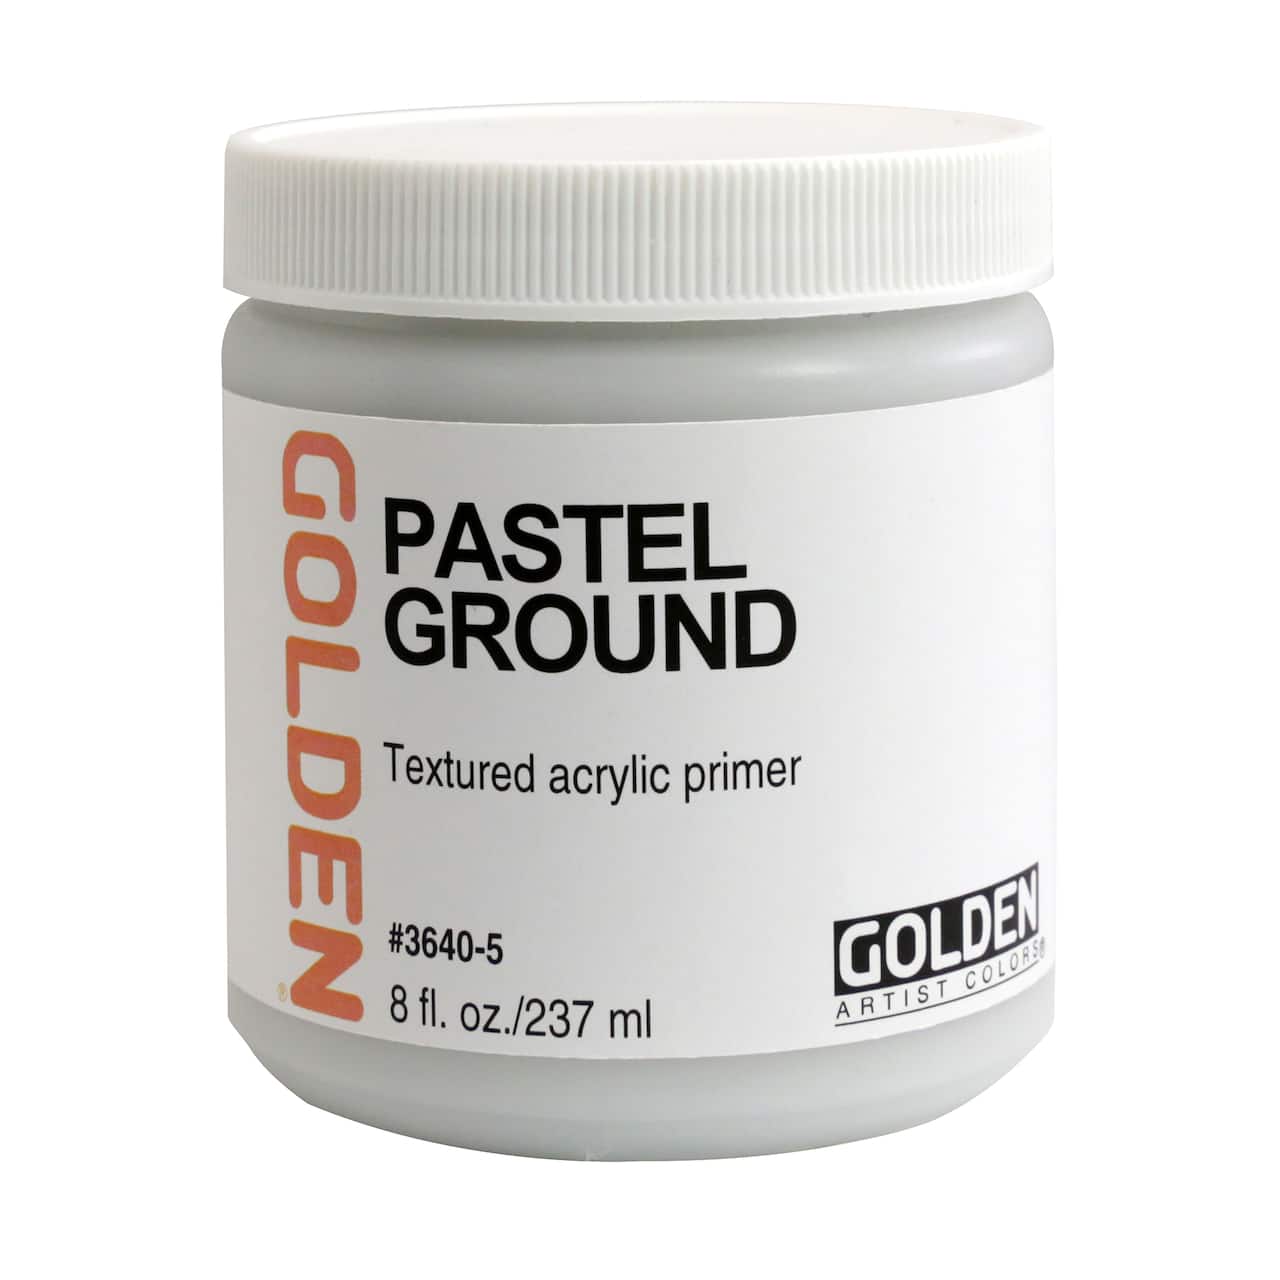 Golden&#xAE; Acrylic Ground for Pastels